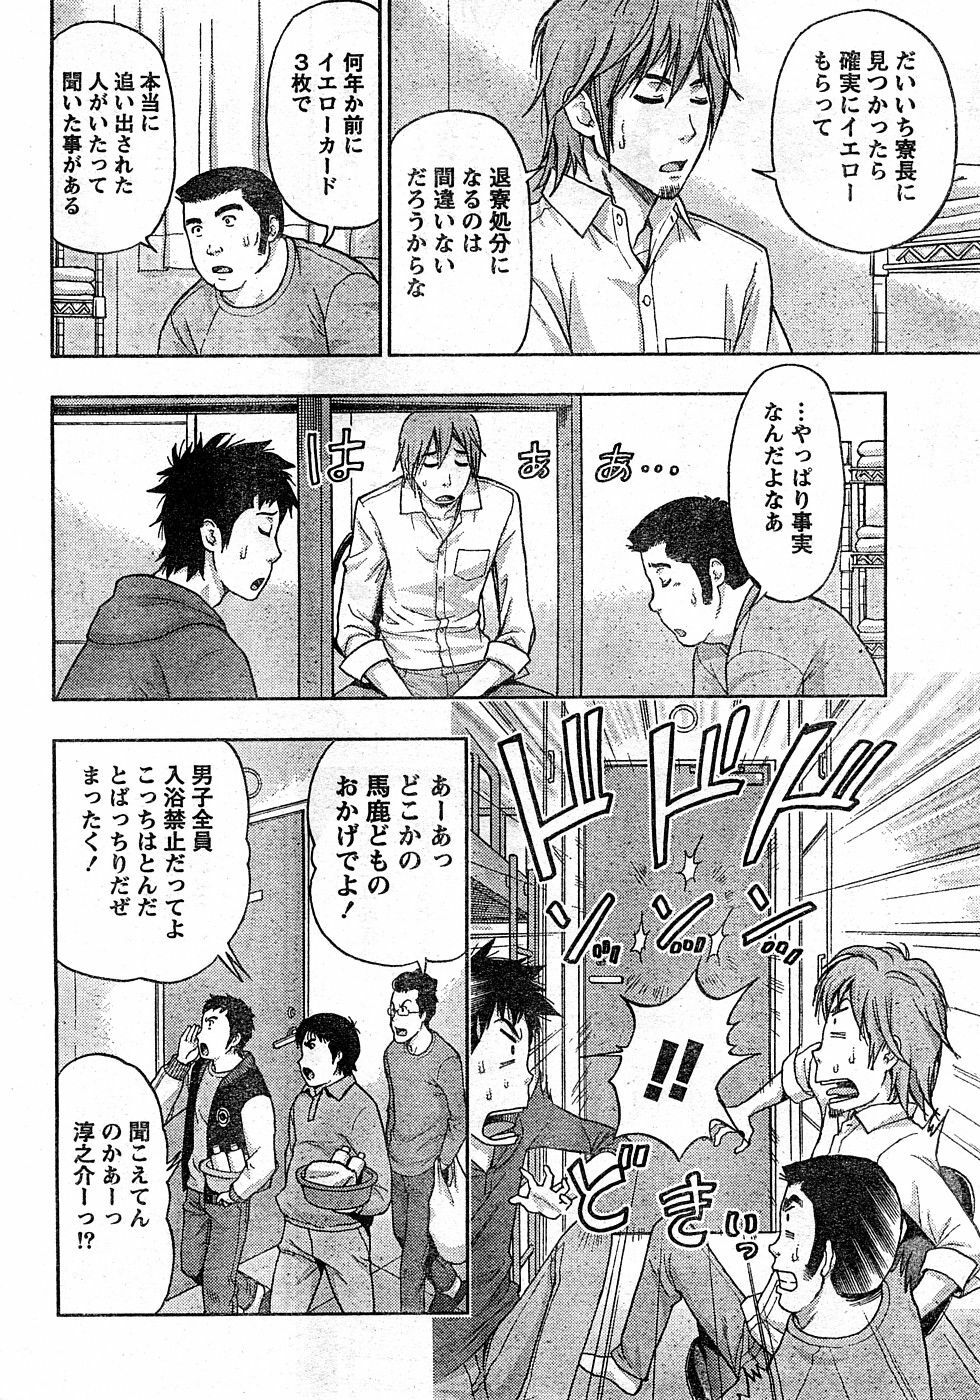 Monthly Vitaman 2009-02 [Incomplete] page 13 full